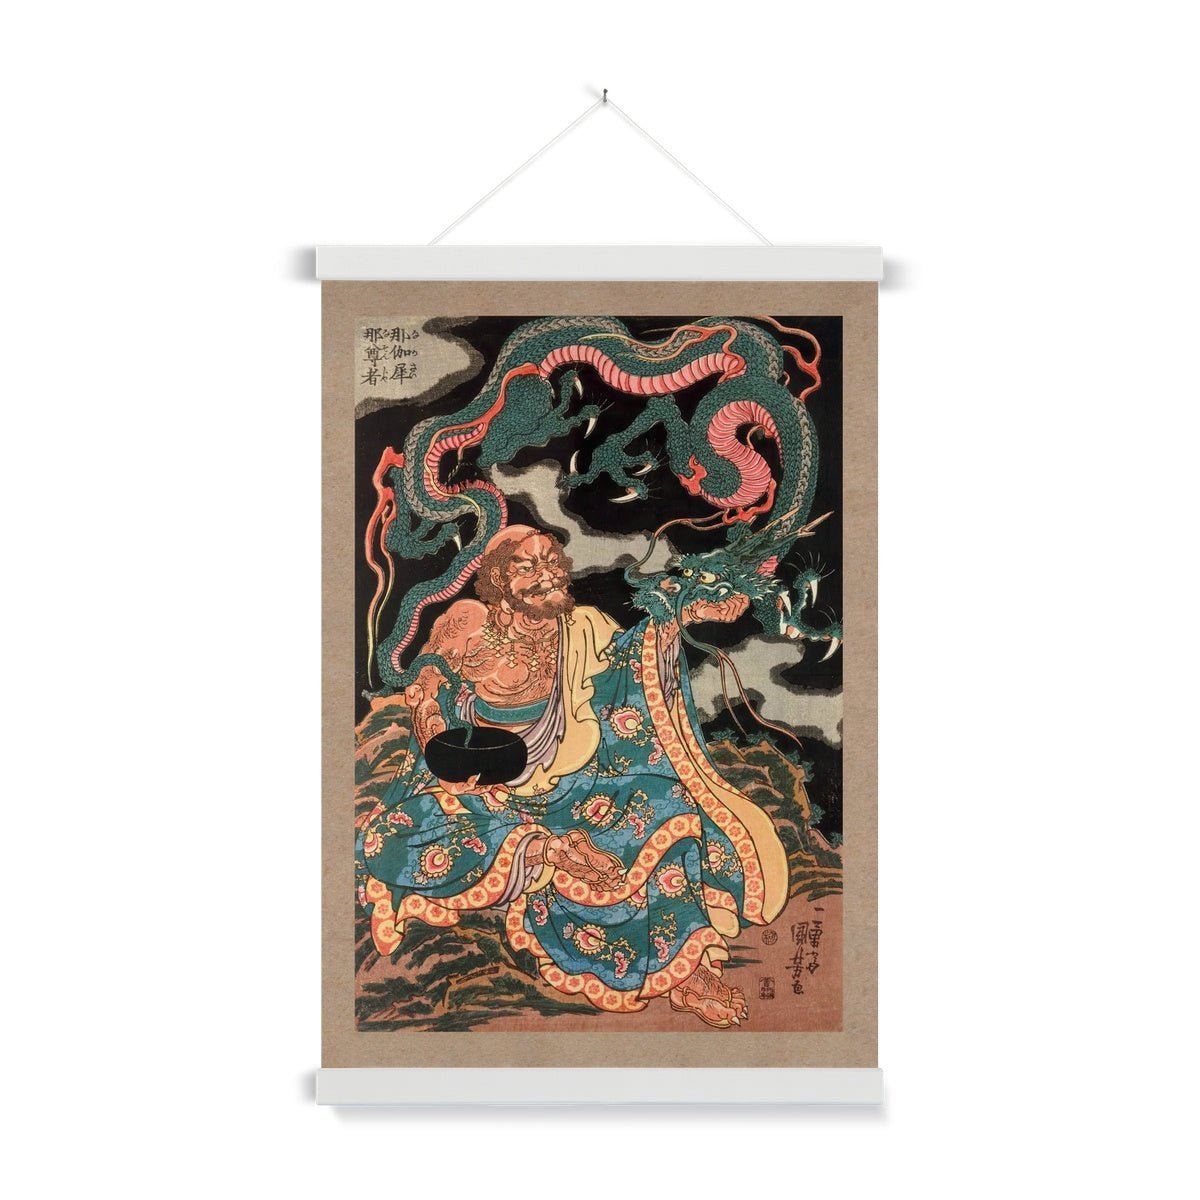 Fine art 6"x8" / White Frame The Arhat Nakasaina Sonja Seated On a Rock, with a Dragon Emerging From His Bowl, Vintage Buddhist Japanese Fine Art Print with Hanger